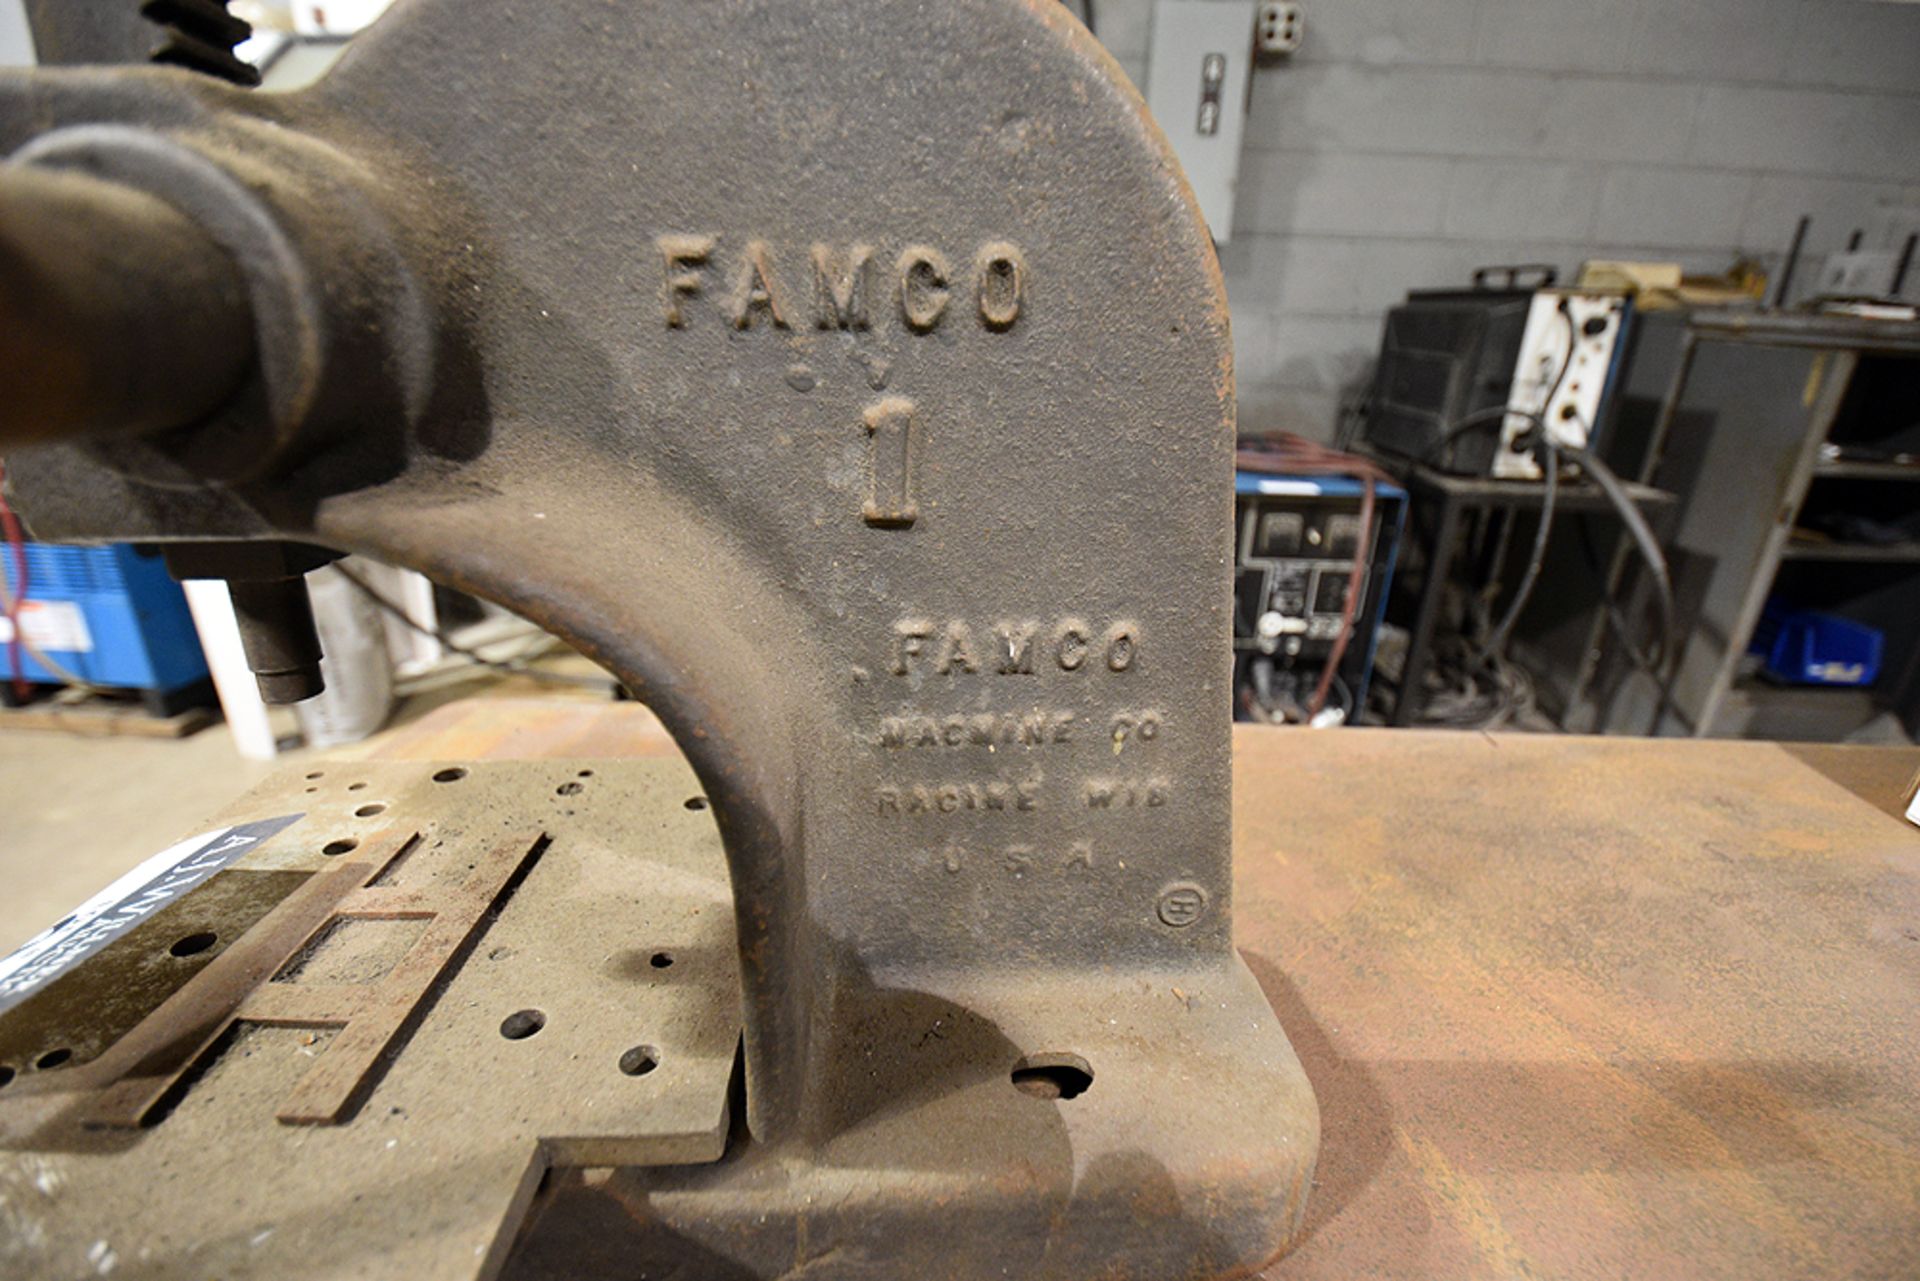 Famco #1 bench arbor press - Image 2 of 2